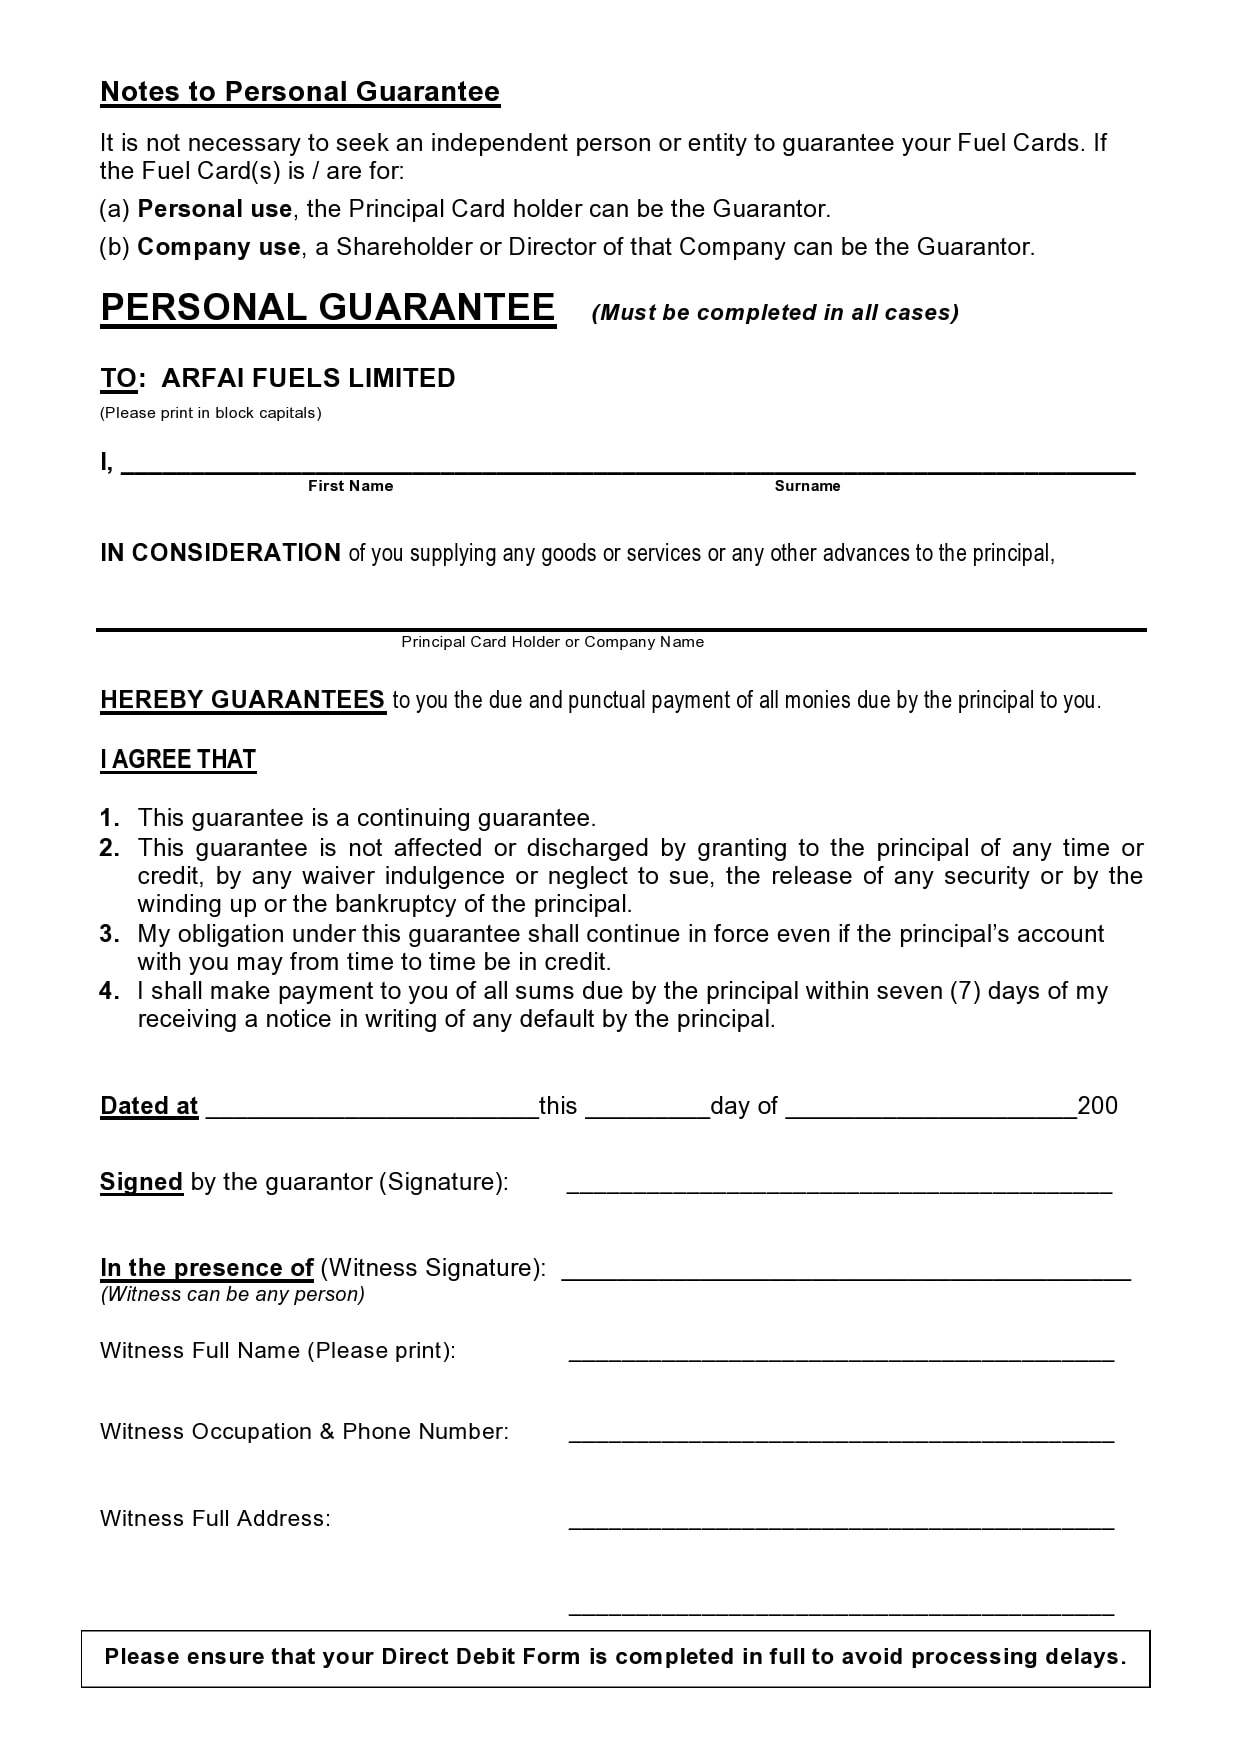 30 Best Personal Guarantee Forms &amp; Templates - Templatearchive regarding Letter Of Personal Guarantee Template